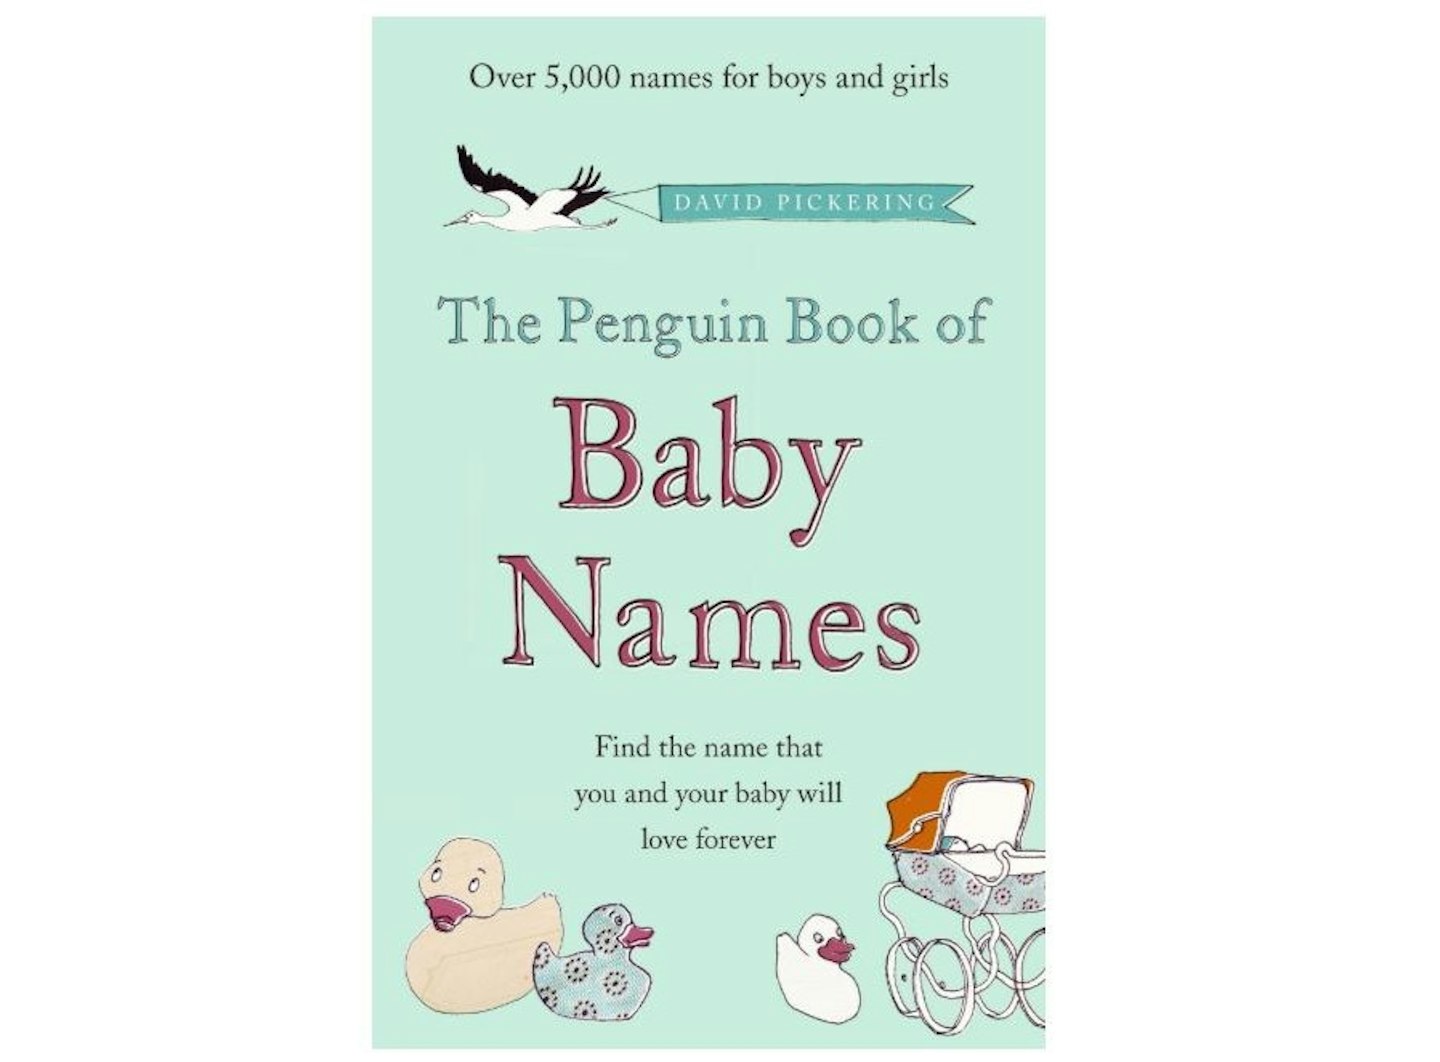 The Penguin Book of Baby Names, 4.84